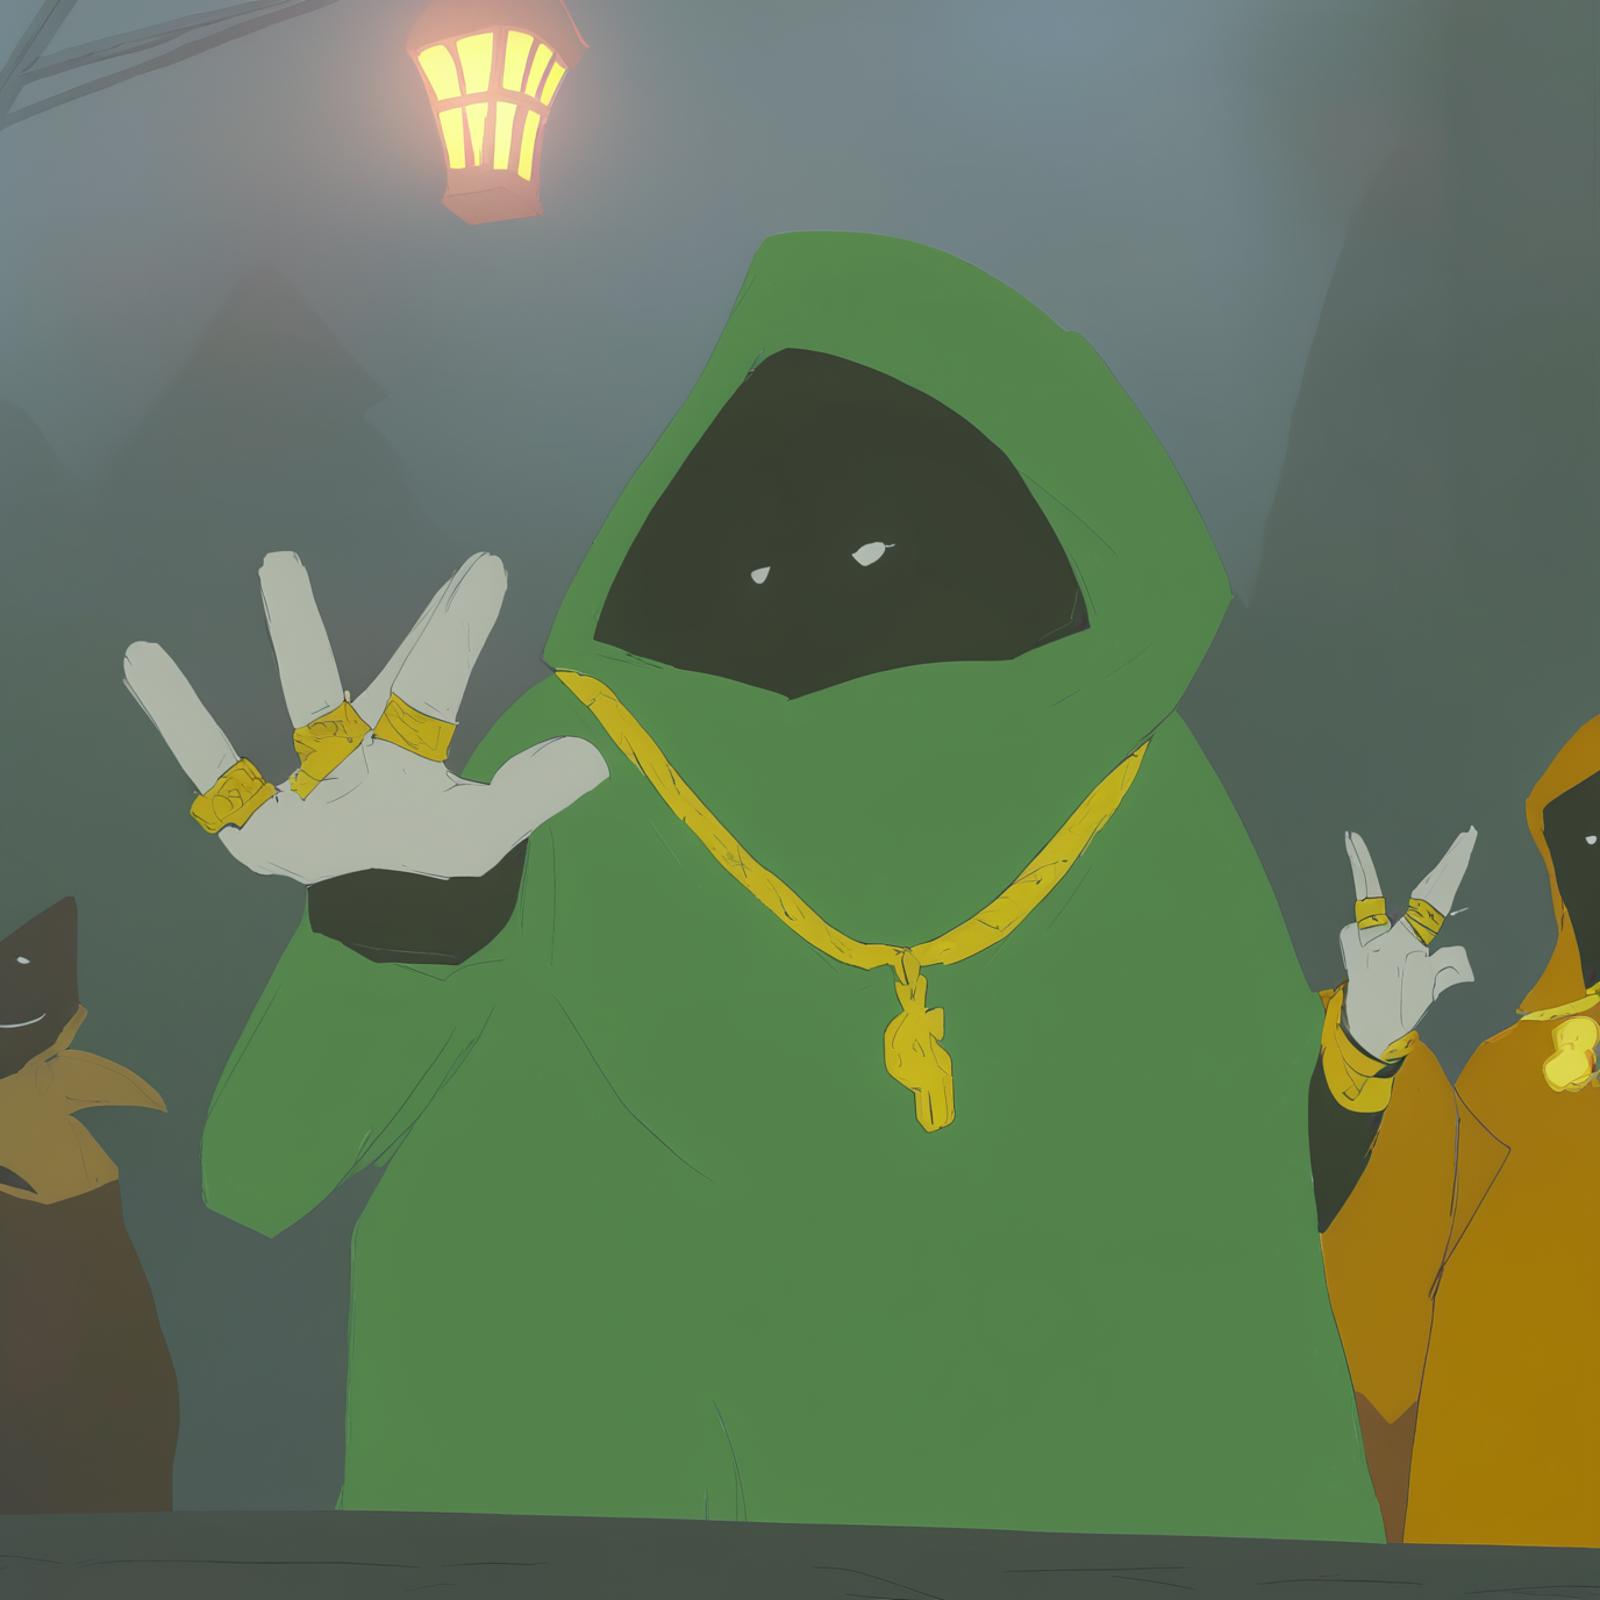 shadow wizard money gang  image by sadsilly